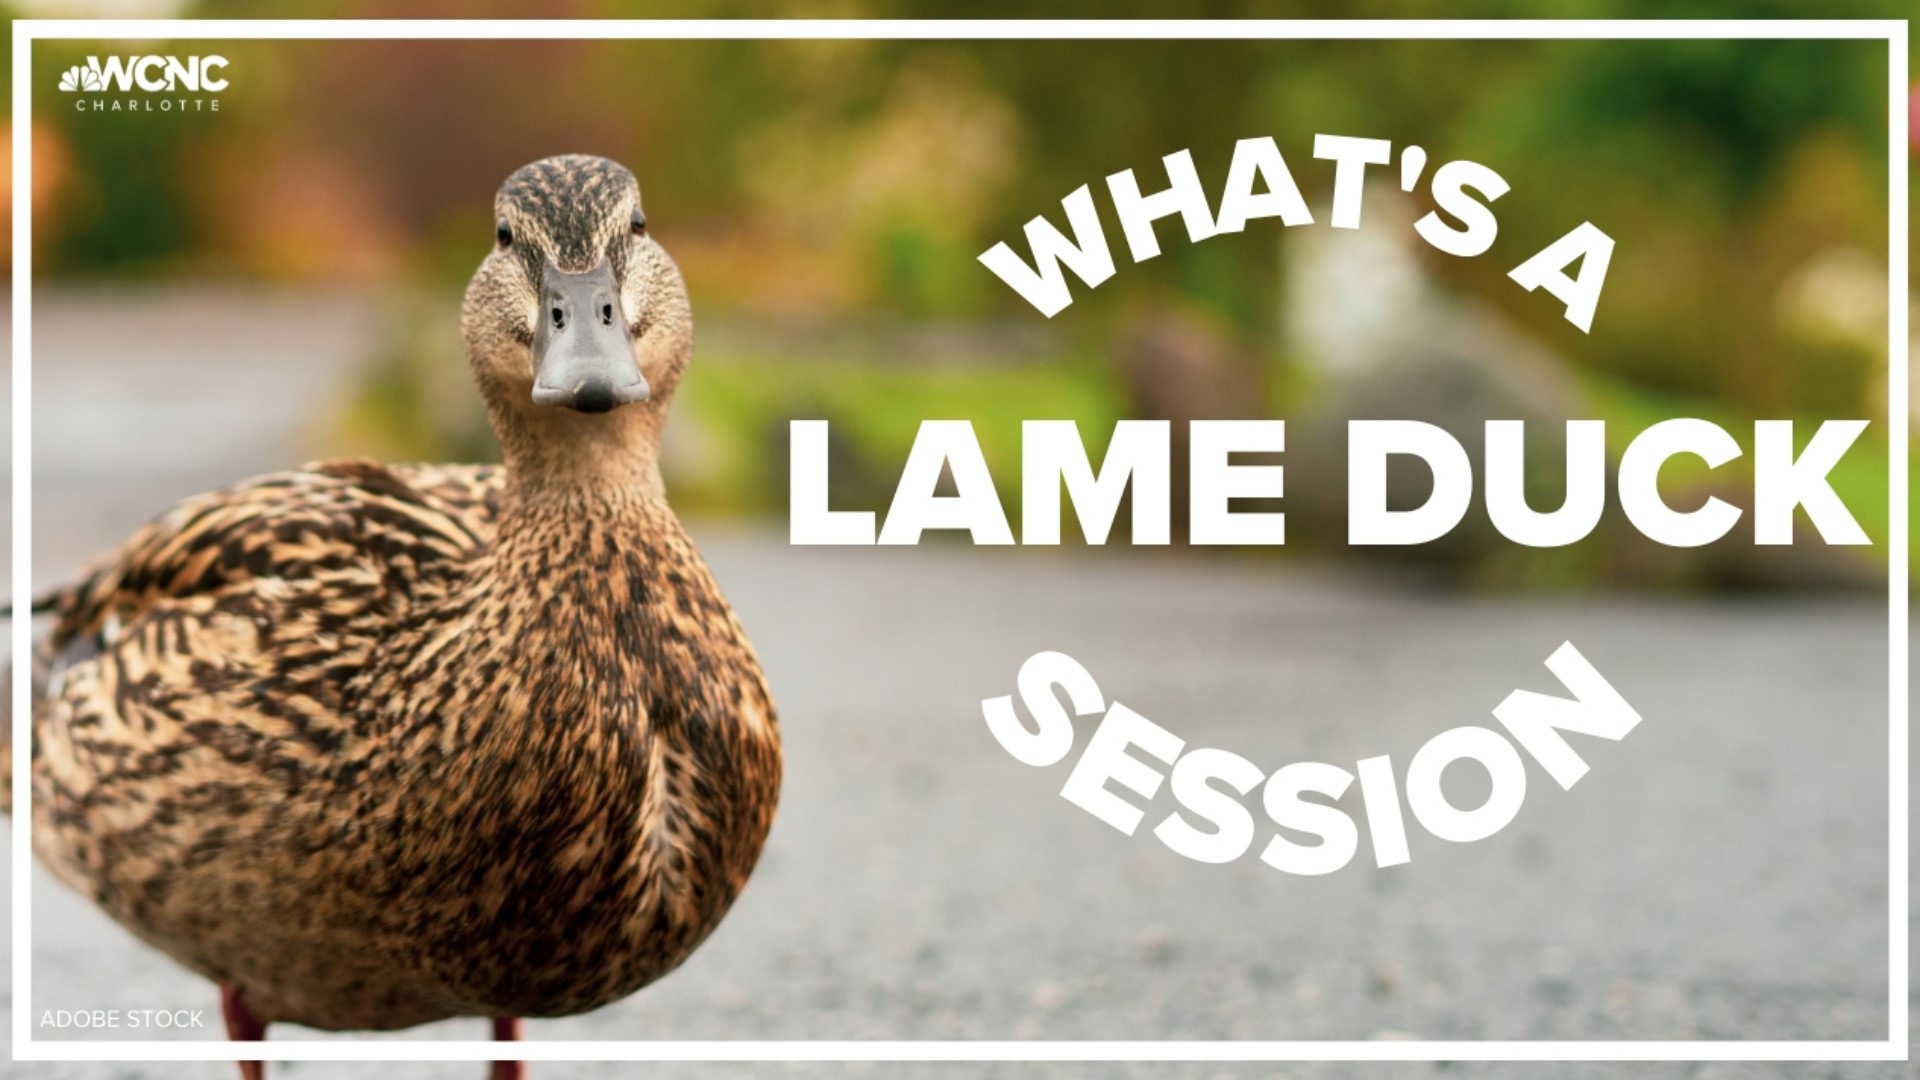 WCNC Charlotte breaks down what a "lame-duck" session means.